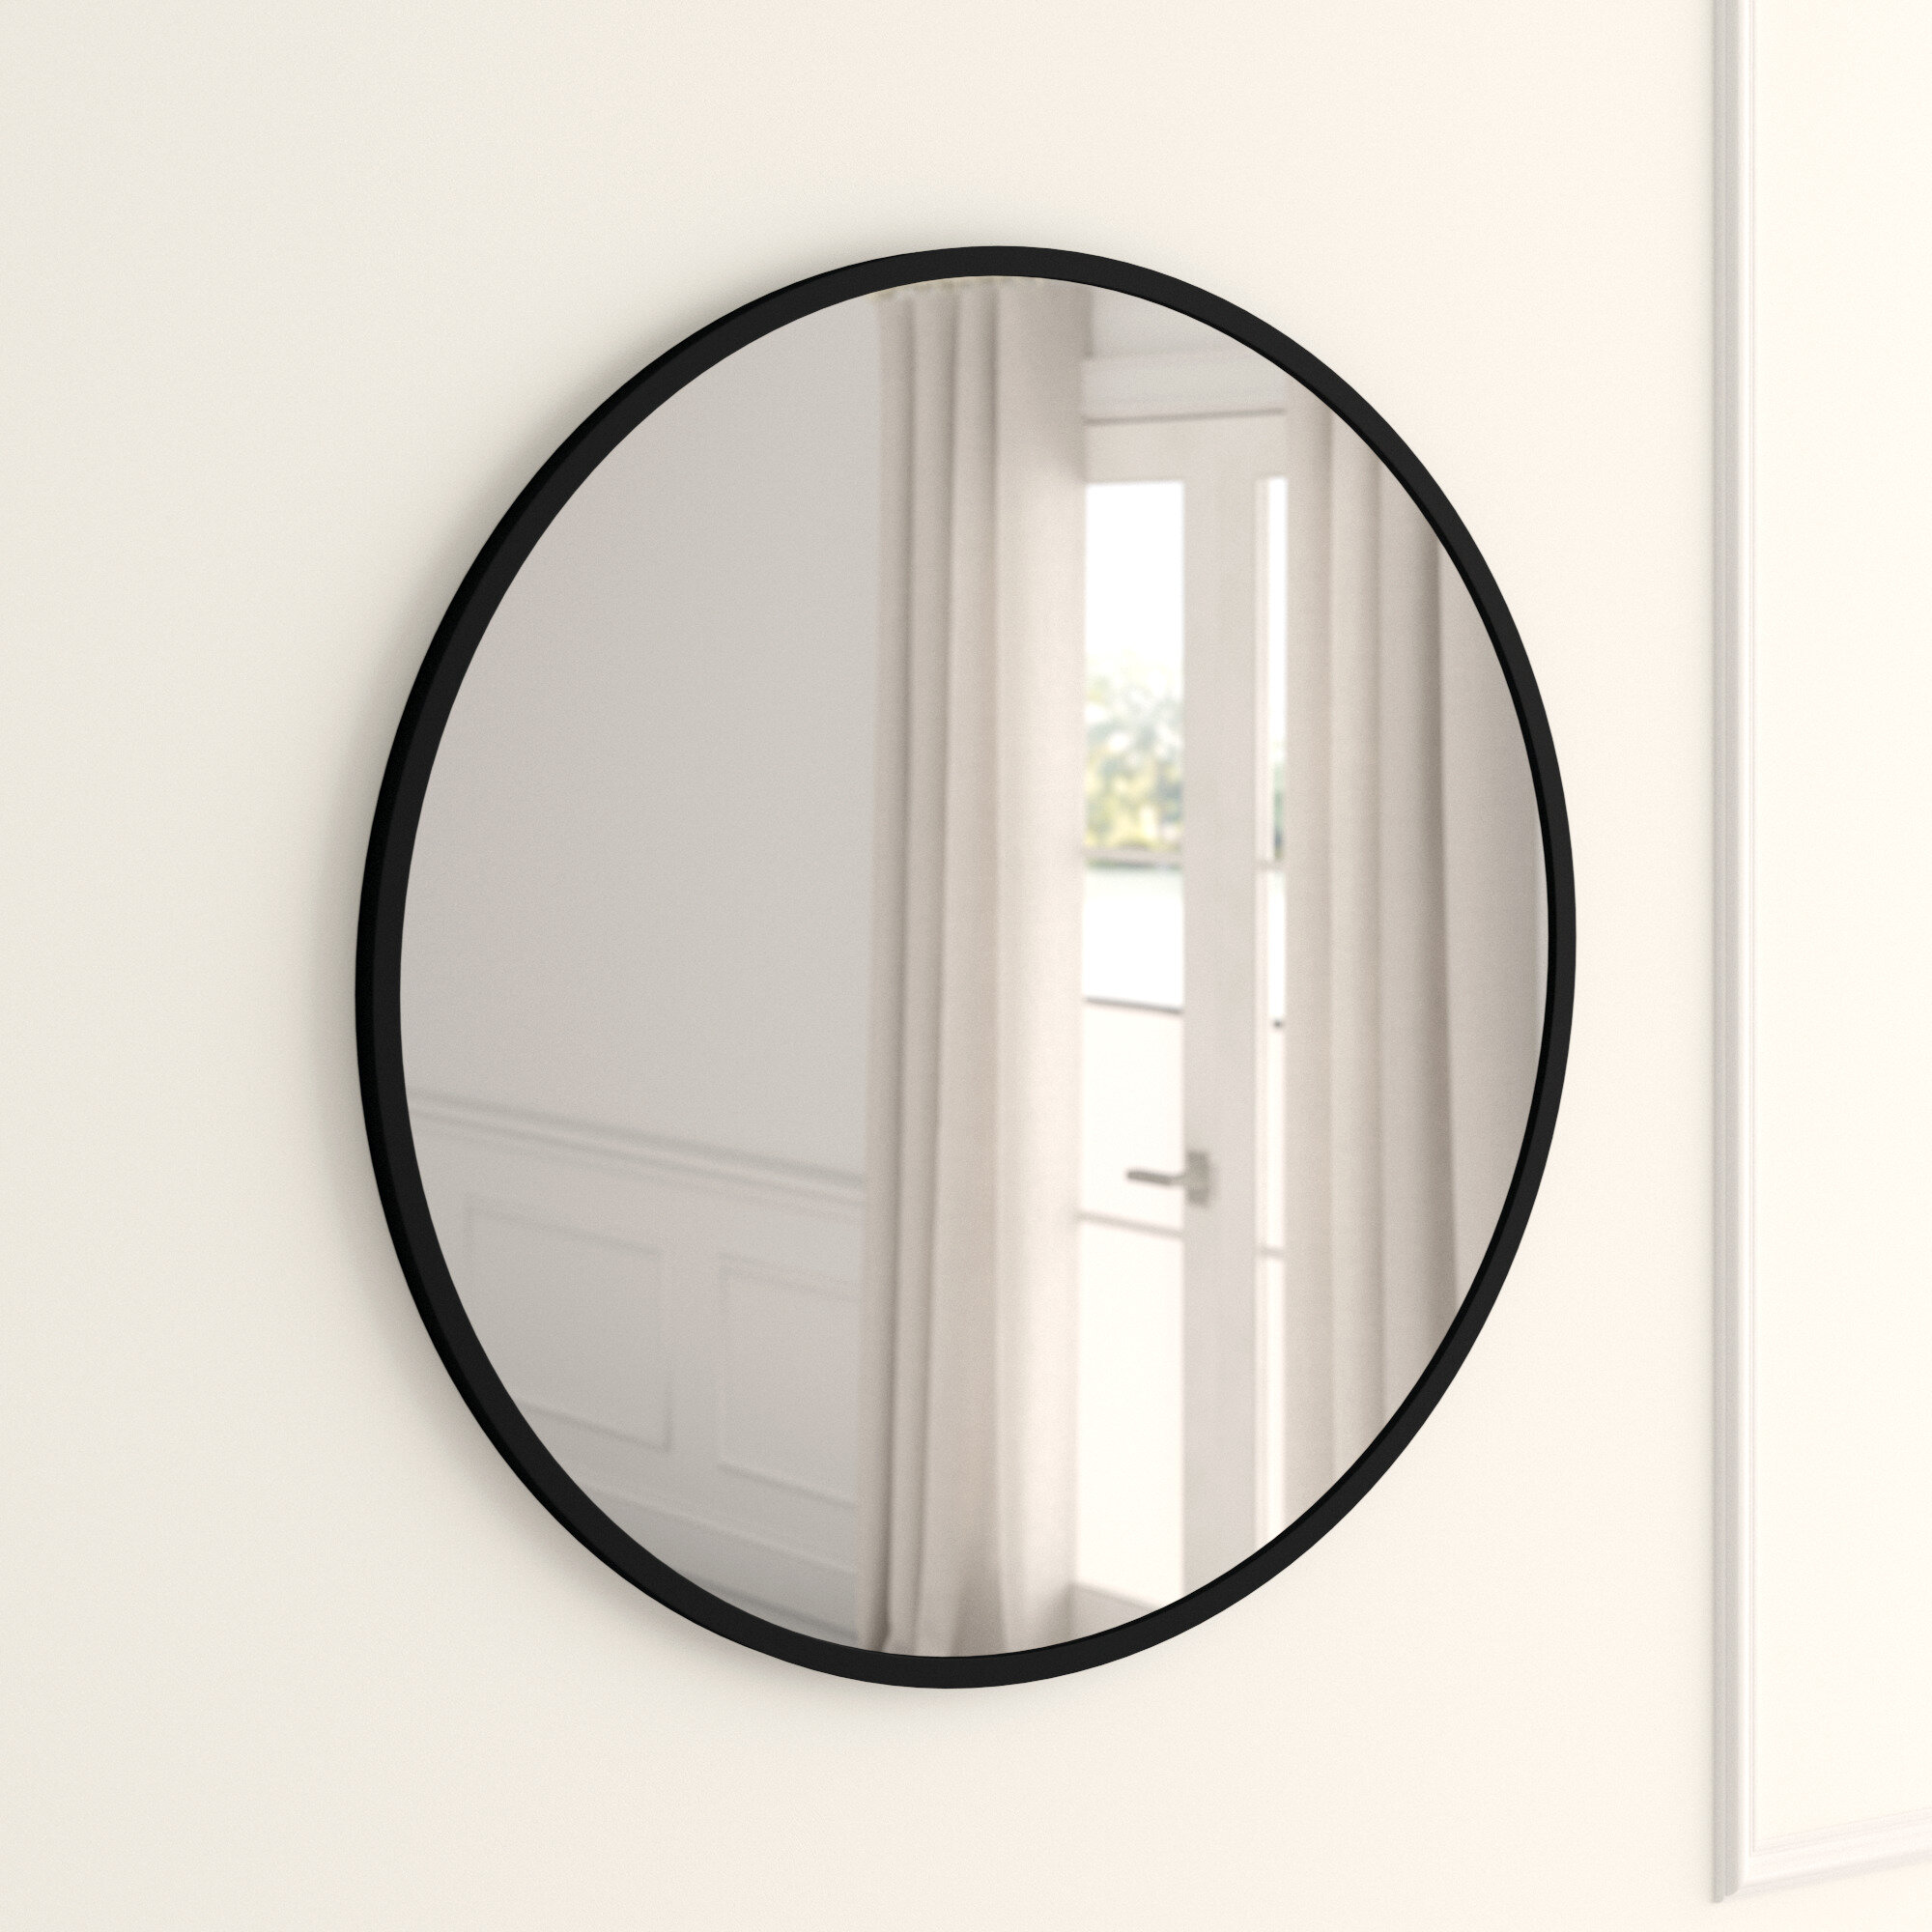  Umbra Hub Round Wall Mirror with Rubber Frame, Modern Decor for  Entryways, Washrooms, Living Rooms and More, 24-Inch, Black : Home & Kitchen